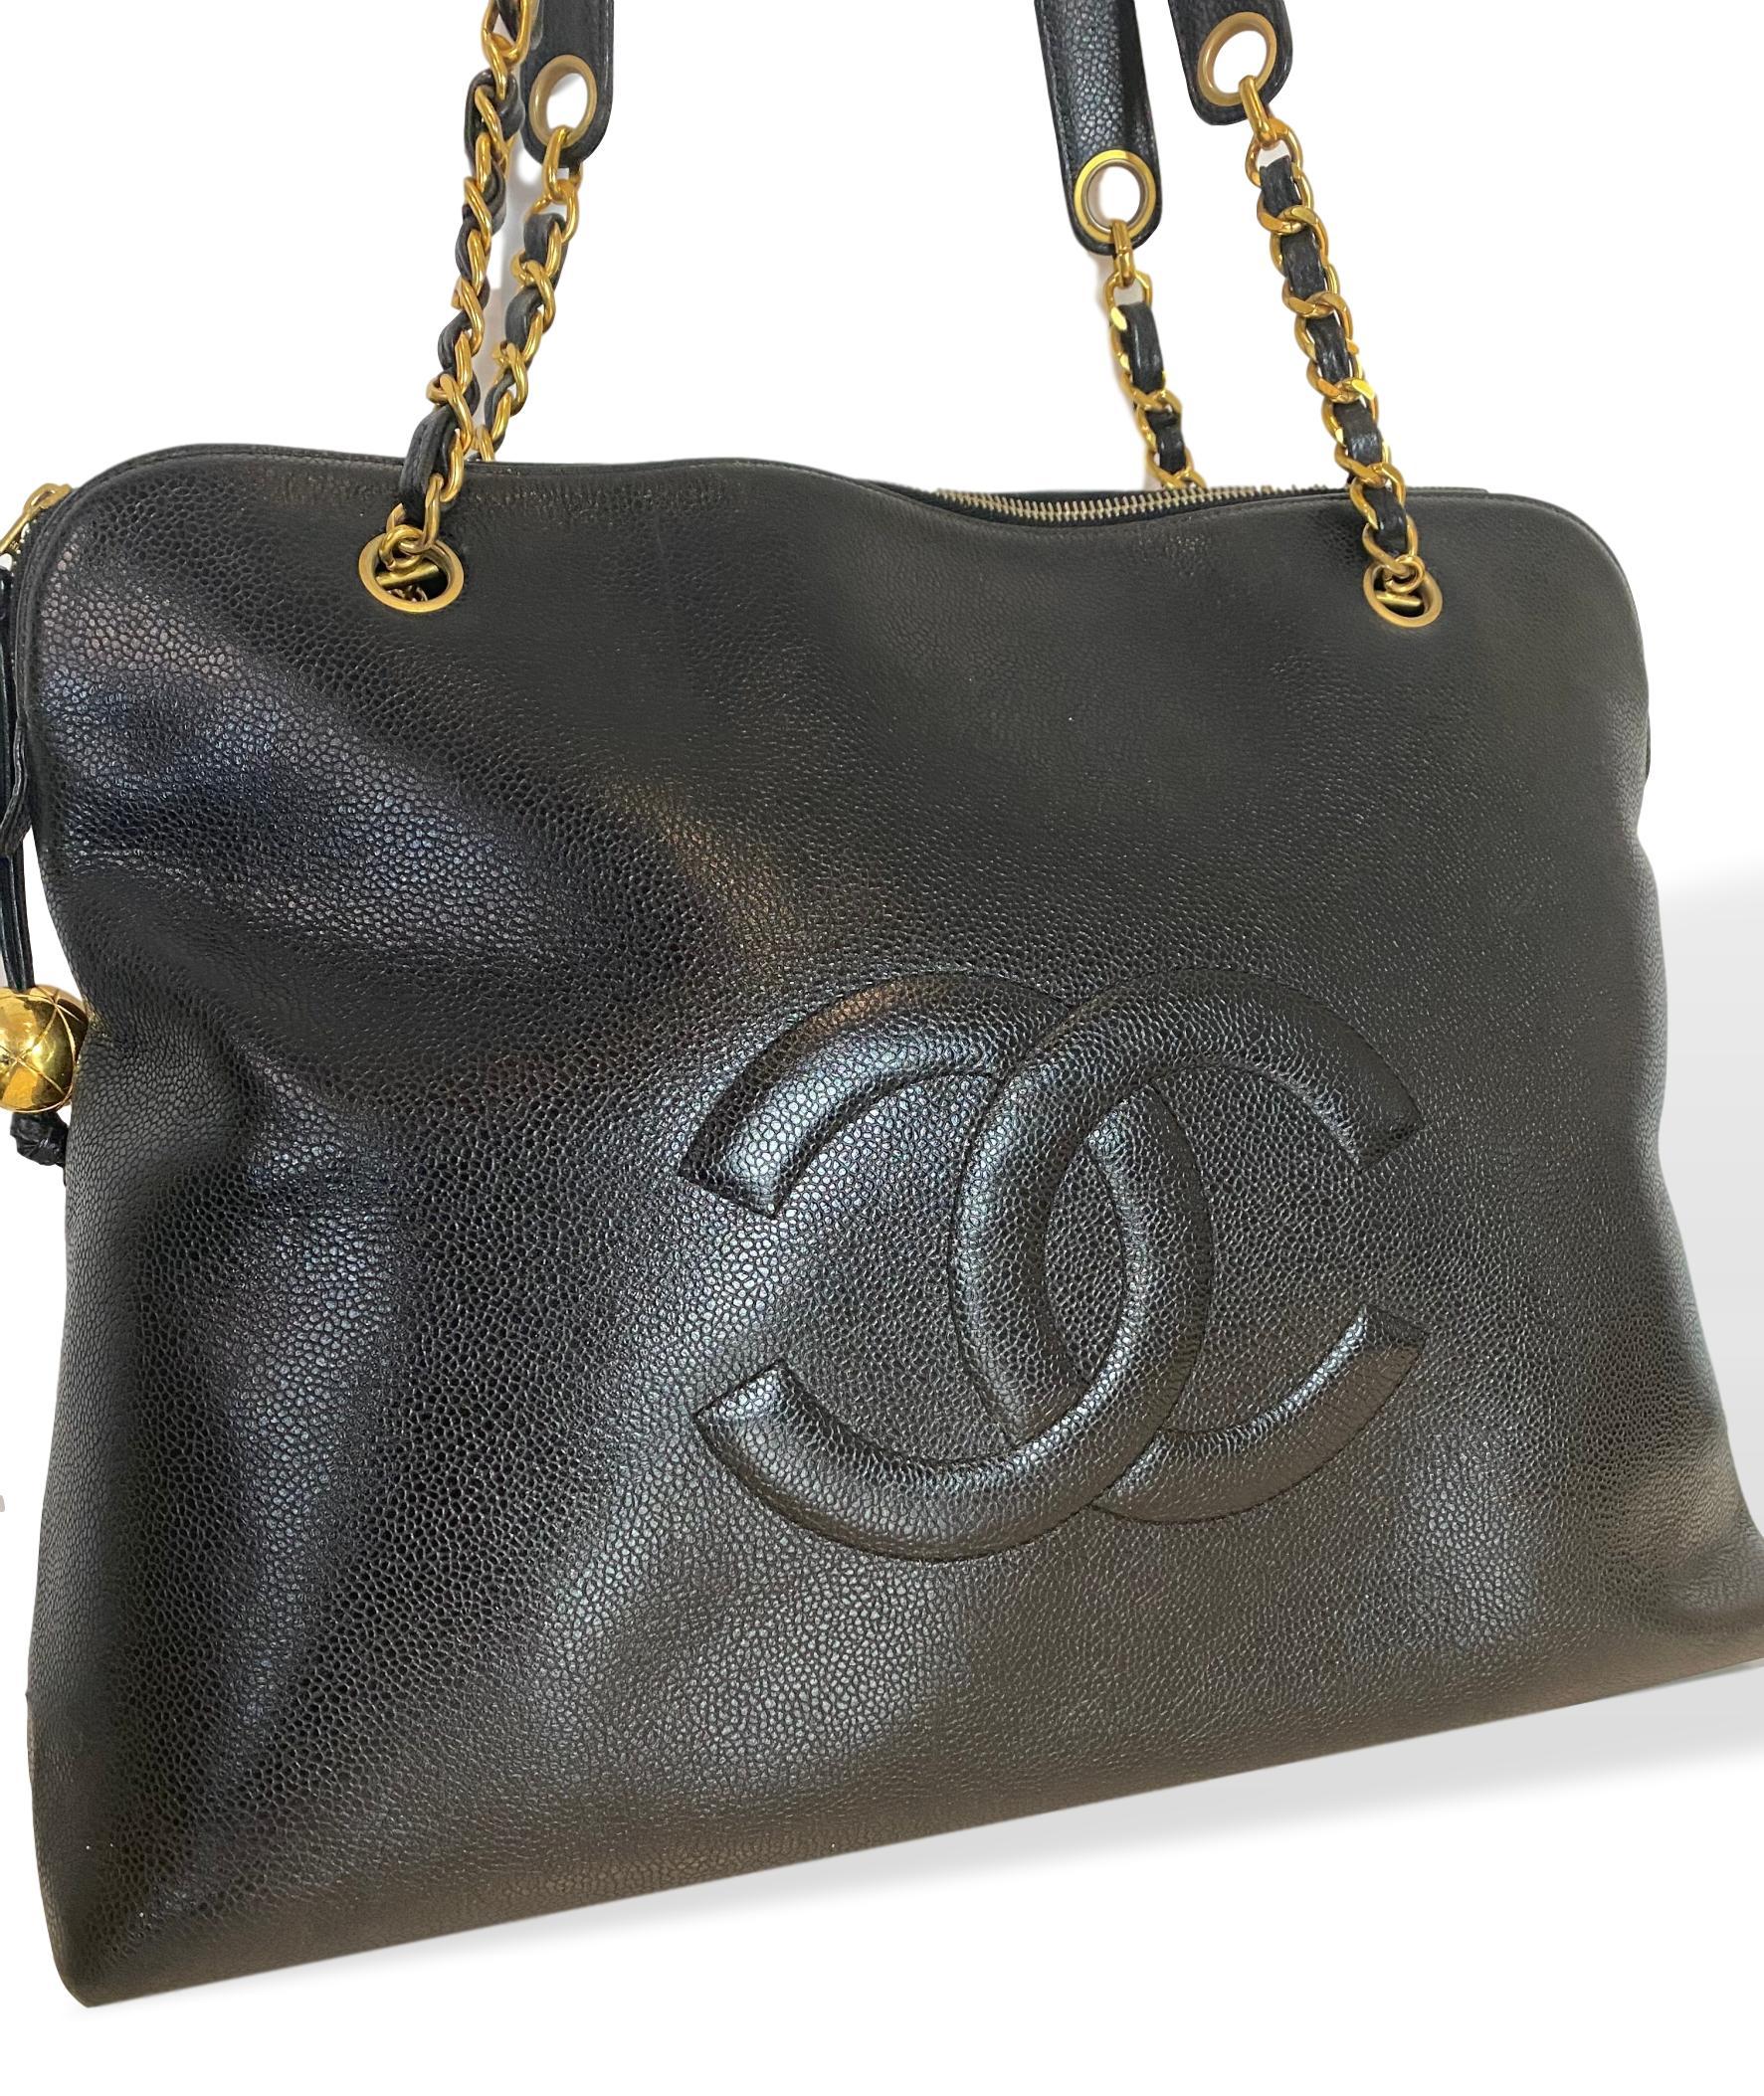 Women's or Men's Chanel Timeless Zip Large Black Caviar Leather Tote, 1994